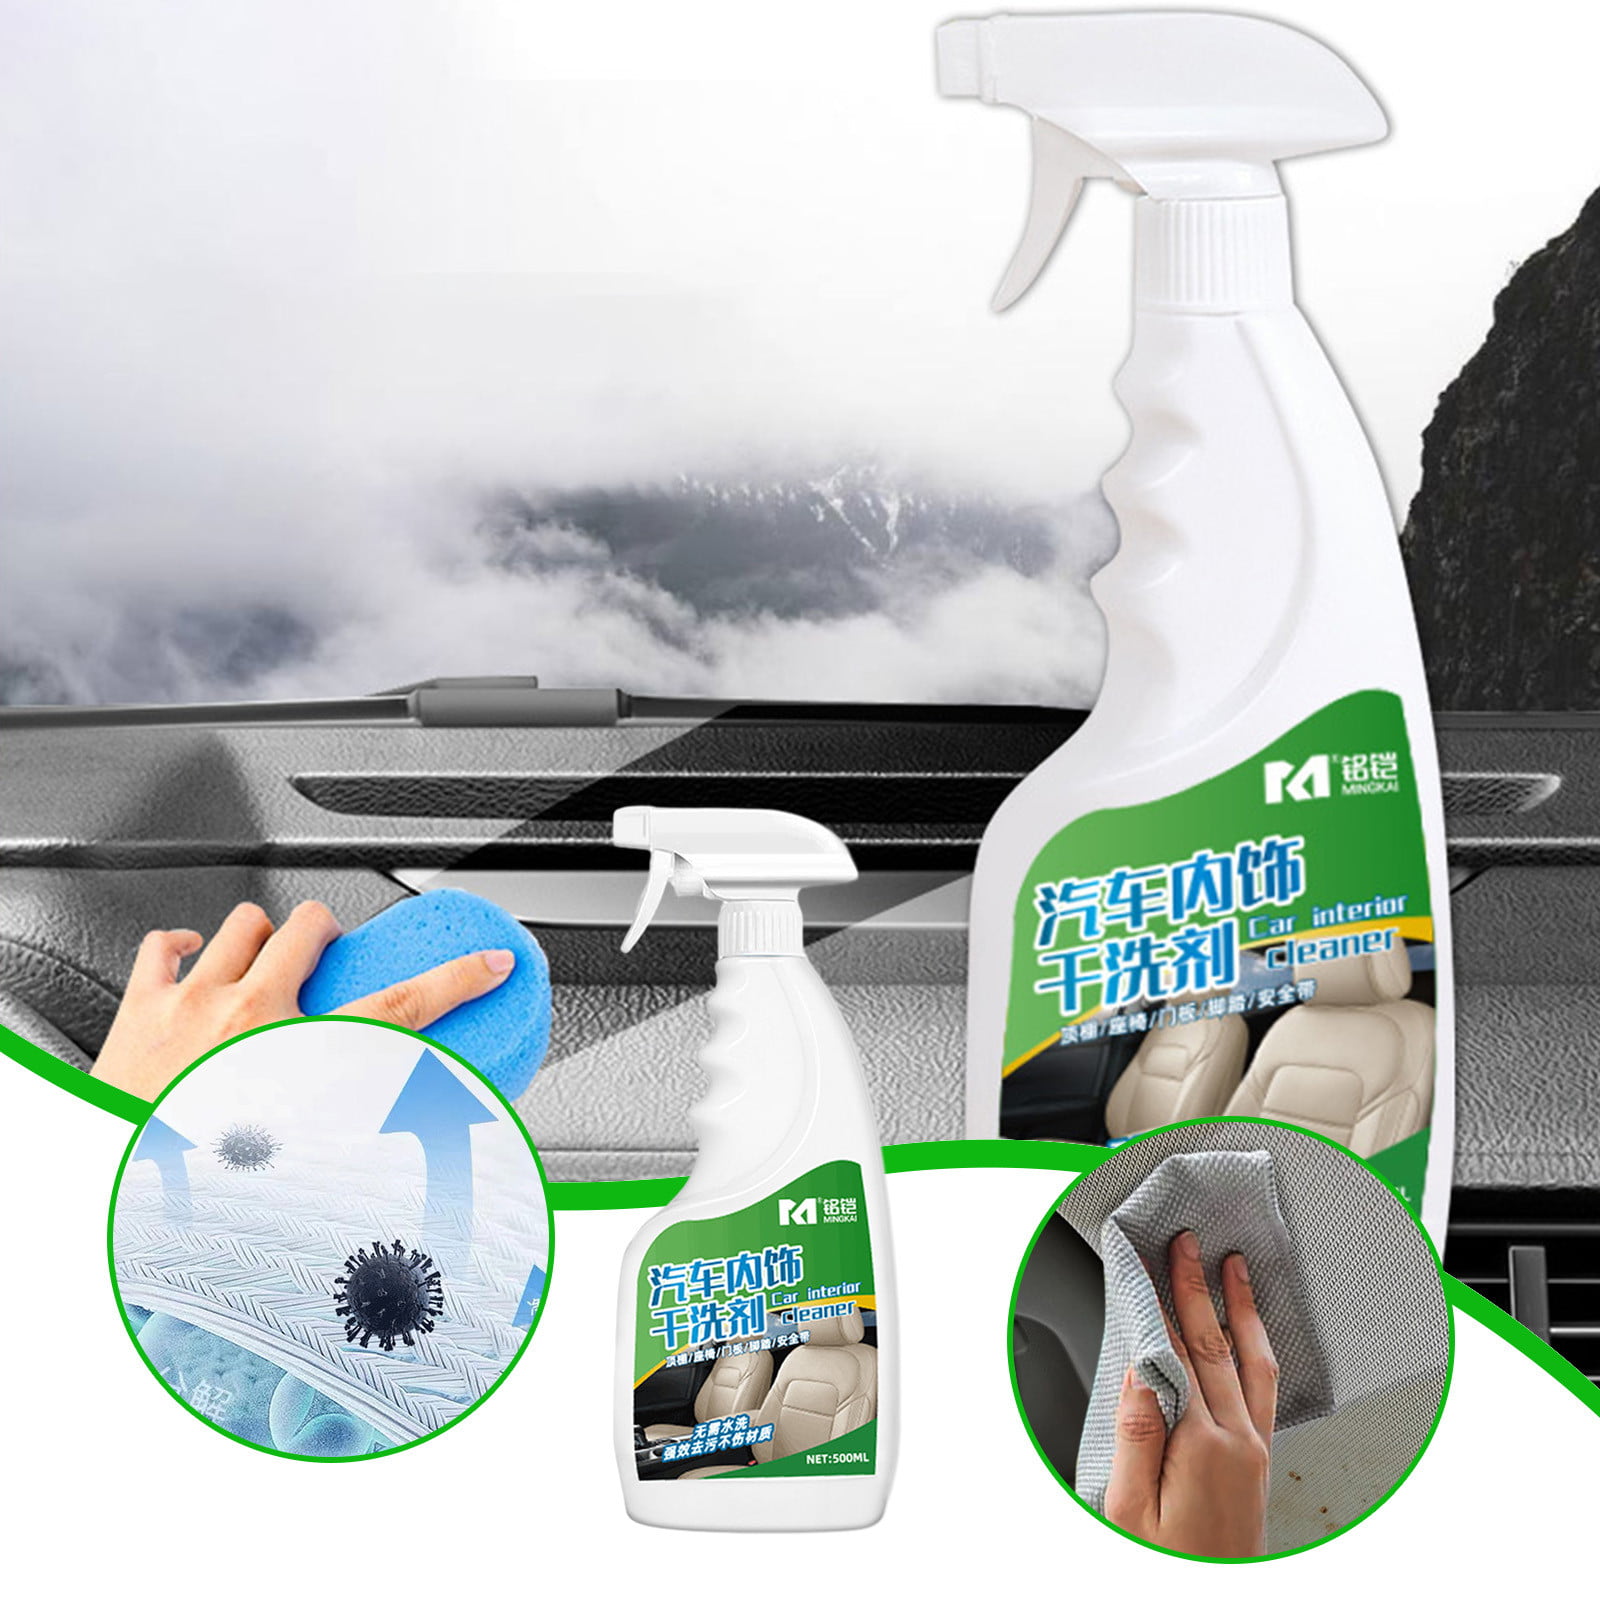 Soft99 New Fabric Seat Cleaner 400ml - MrCleaner